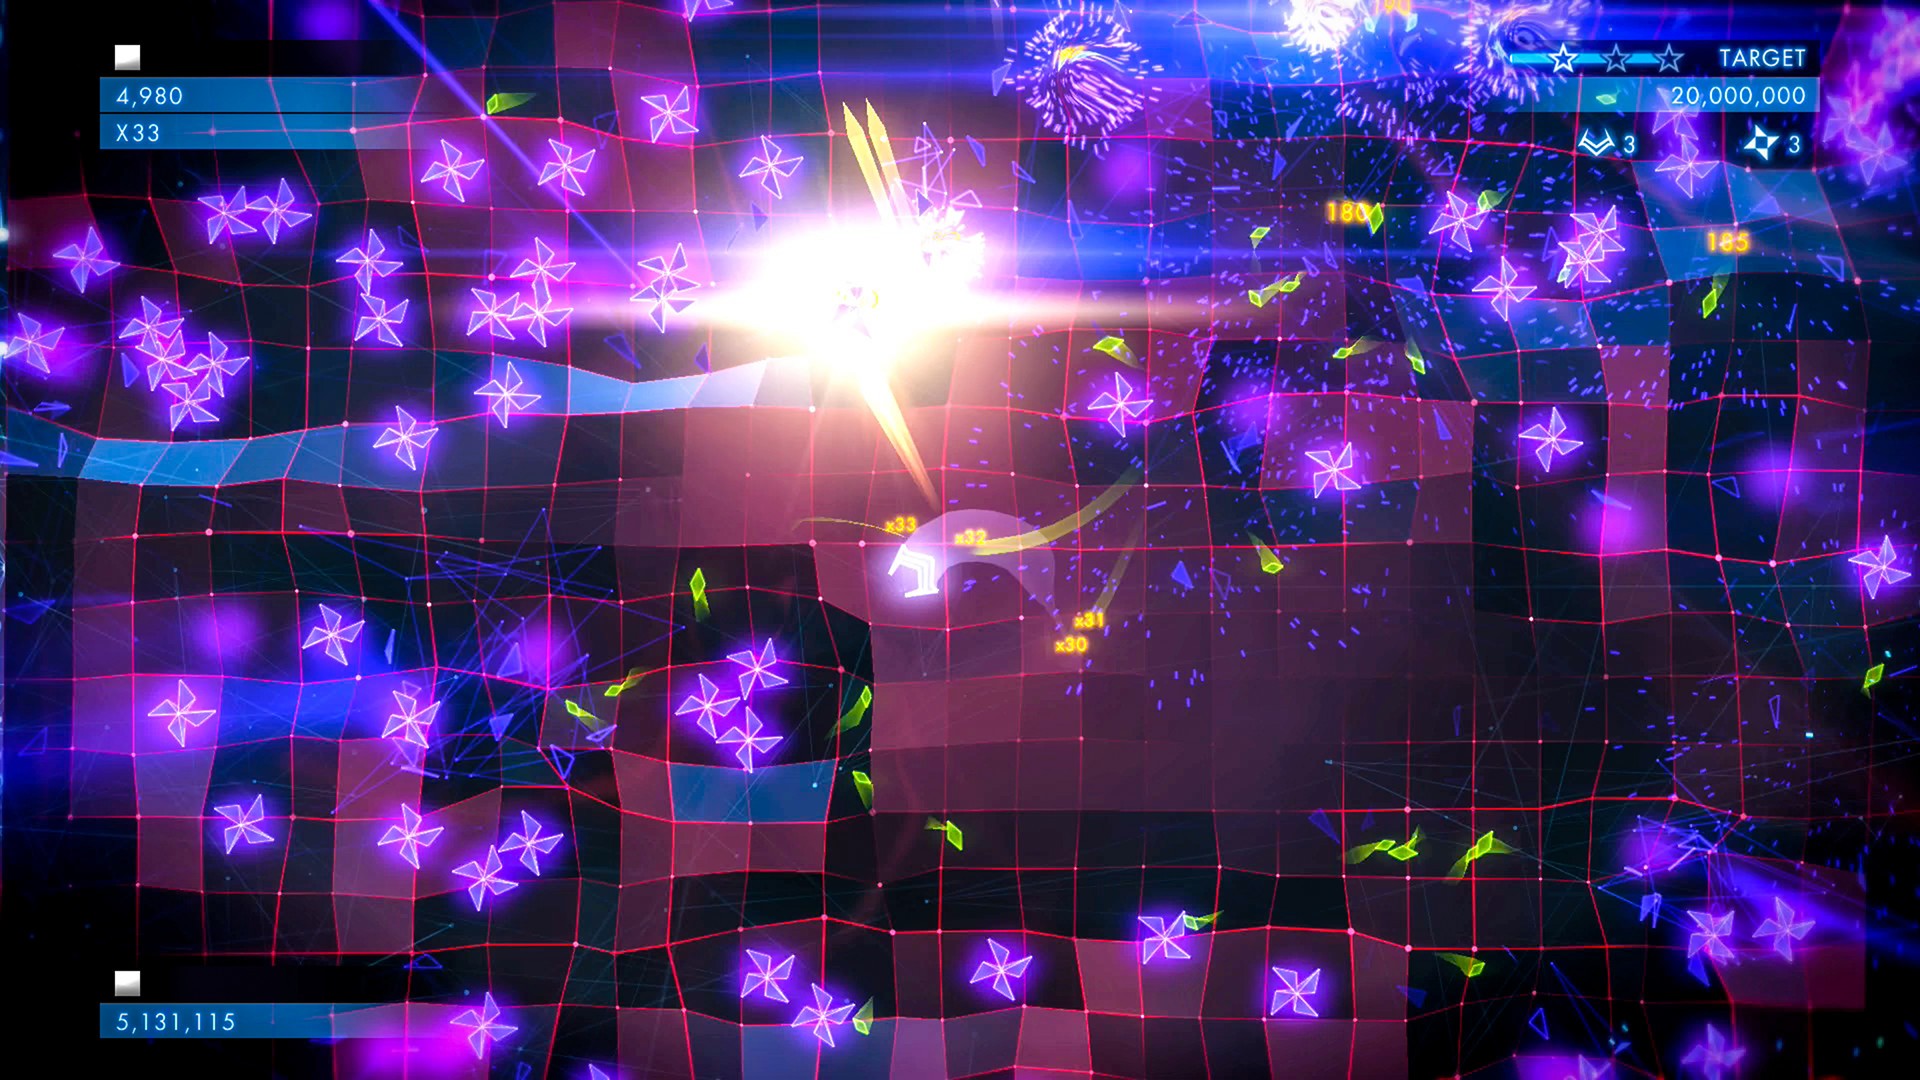 metacritic geometry wars 3 dimensions evolved